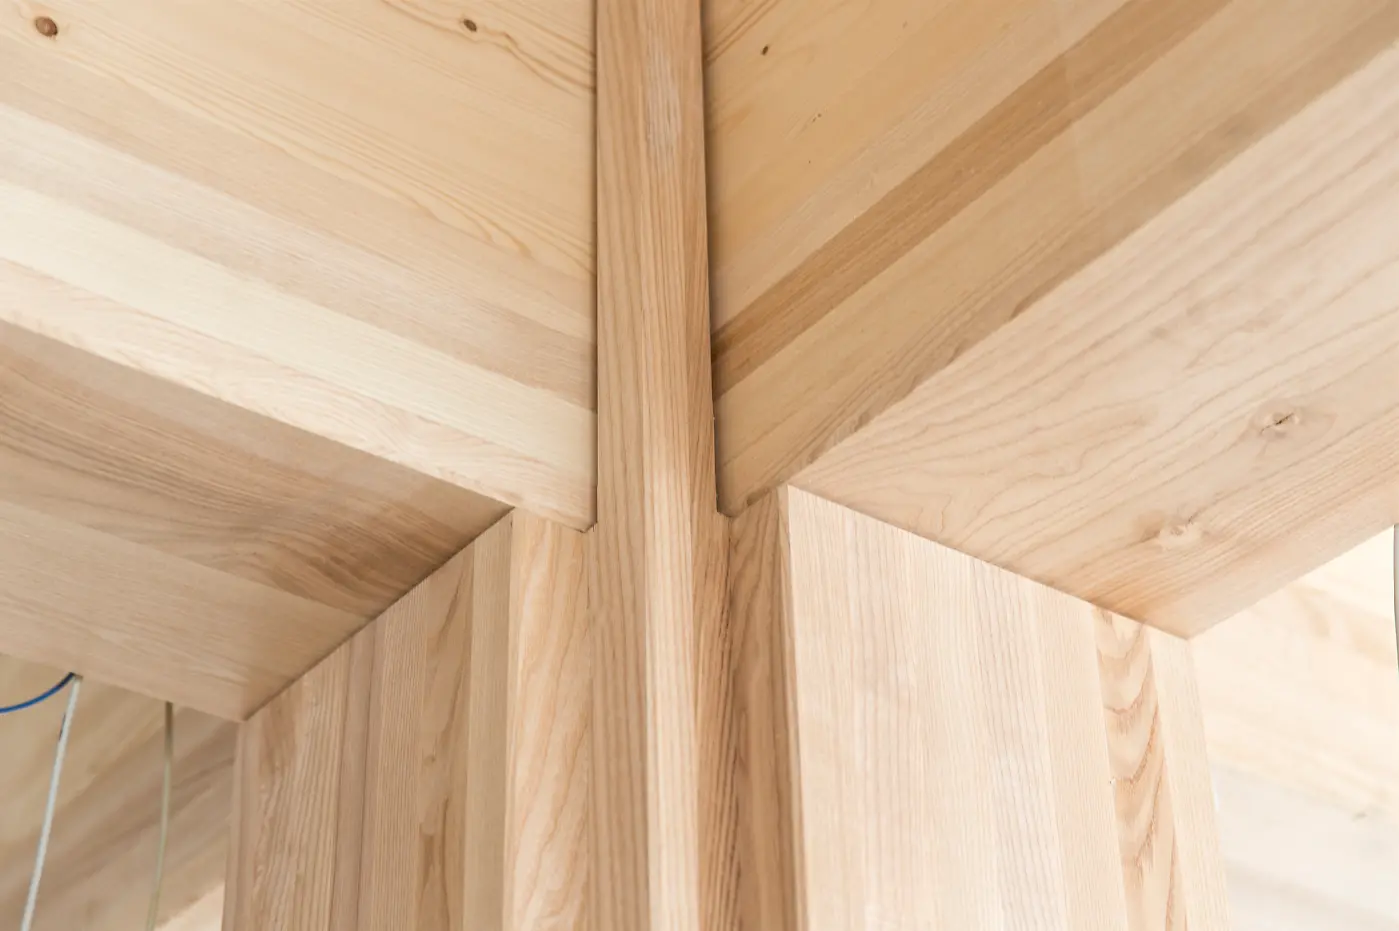 
Close up of a joint and seam of wood panels.